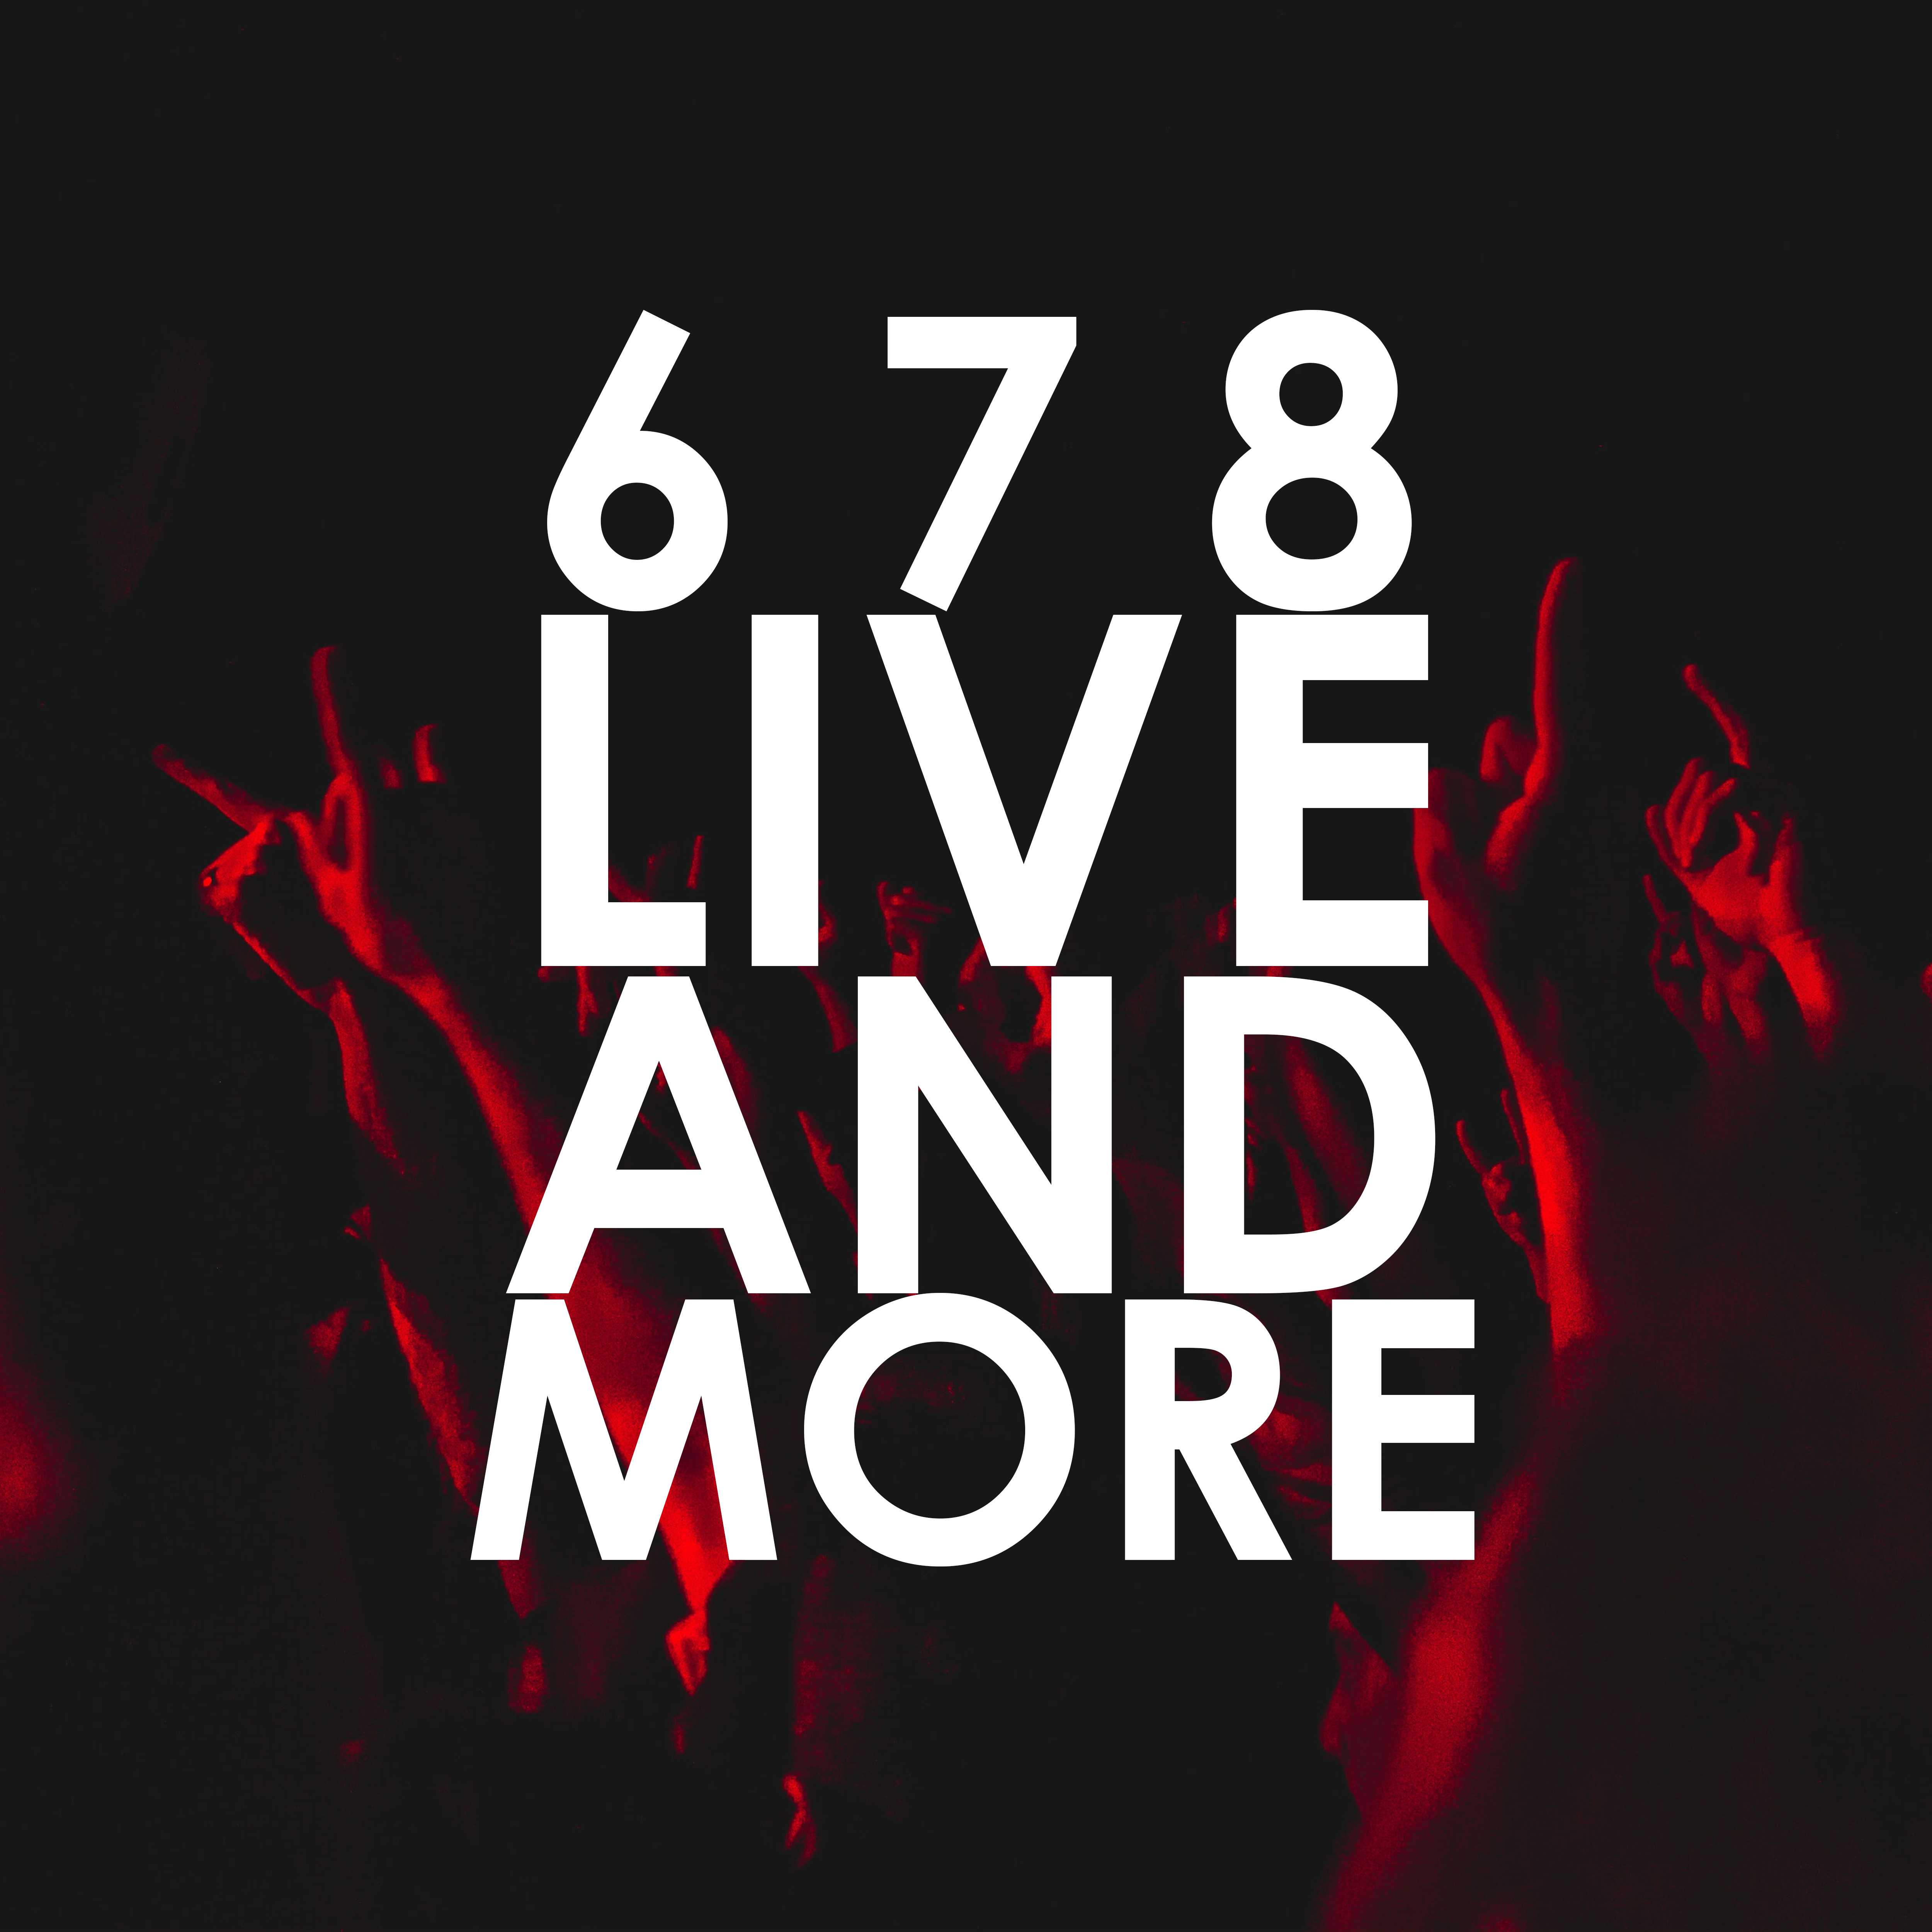 6 7 8 live and more - Yann Free Lance